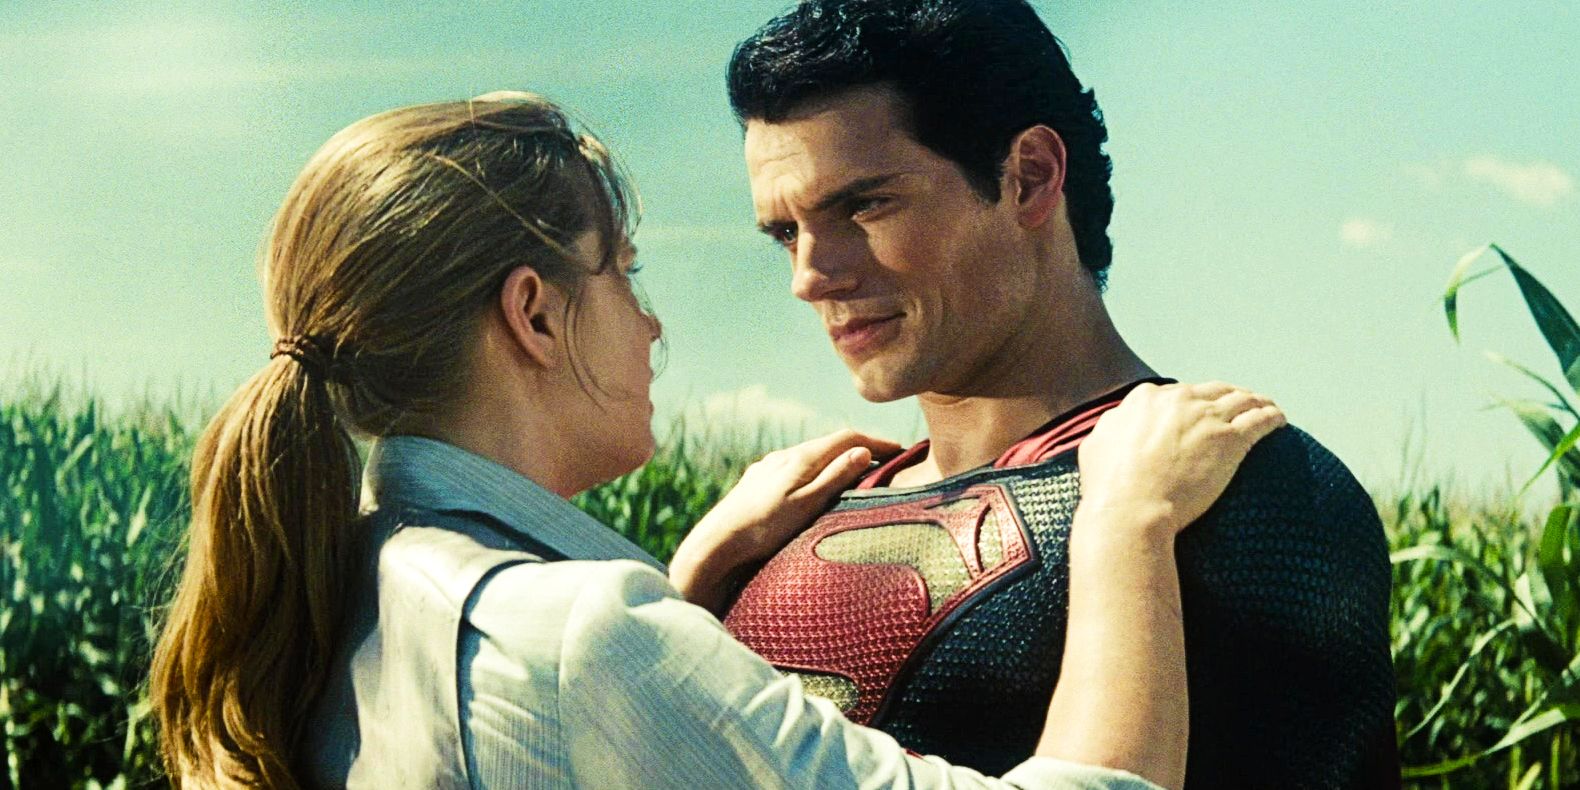 Lois Lane and Superman in cornfield in Man of Steel.